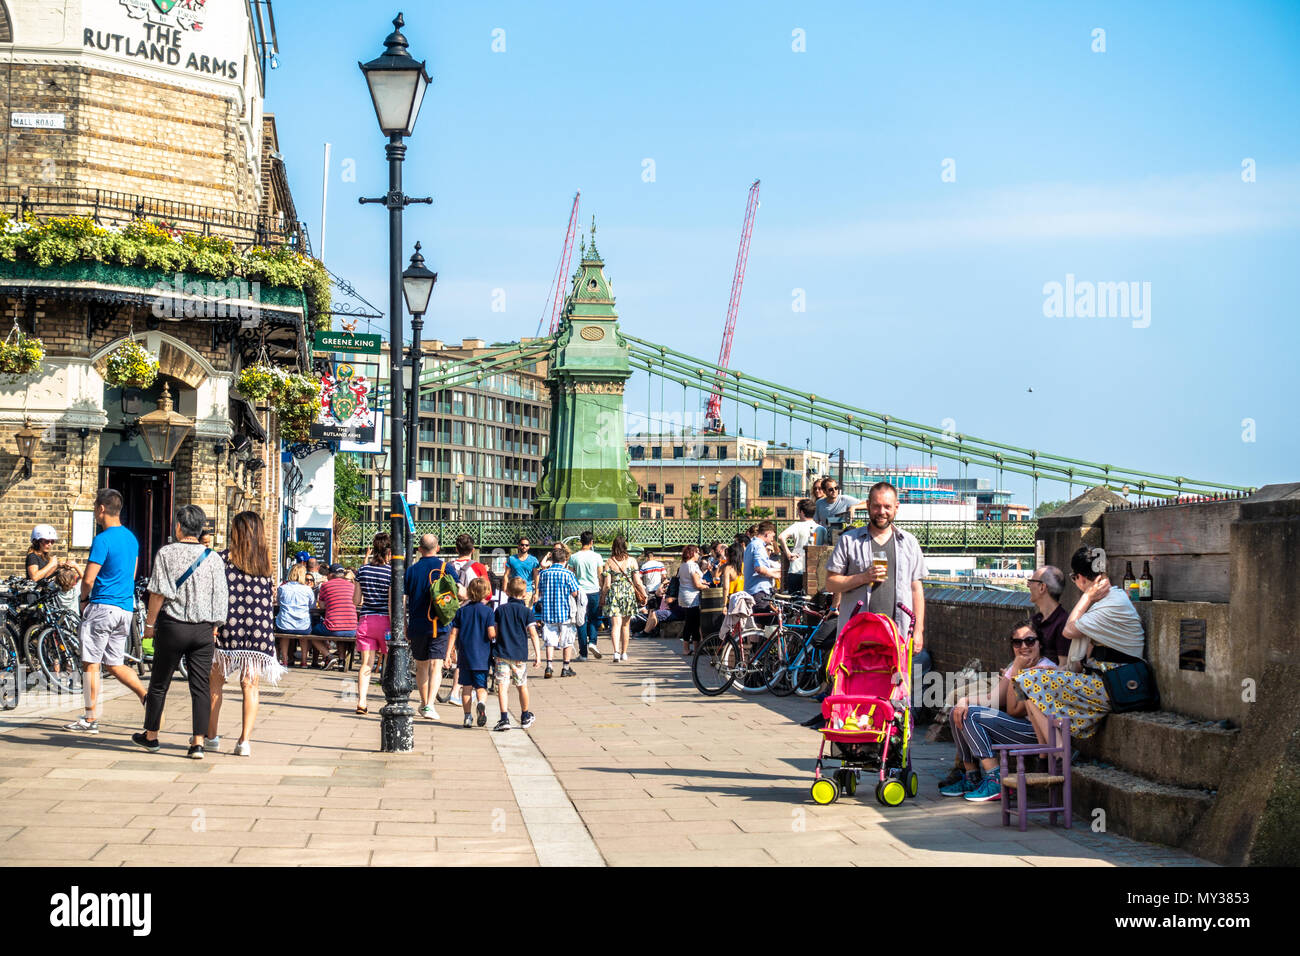 The Rutland Arms pub in Hammersmith, London is busy on a hot, sunny day. Stock Photo